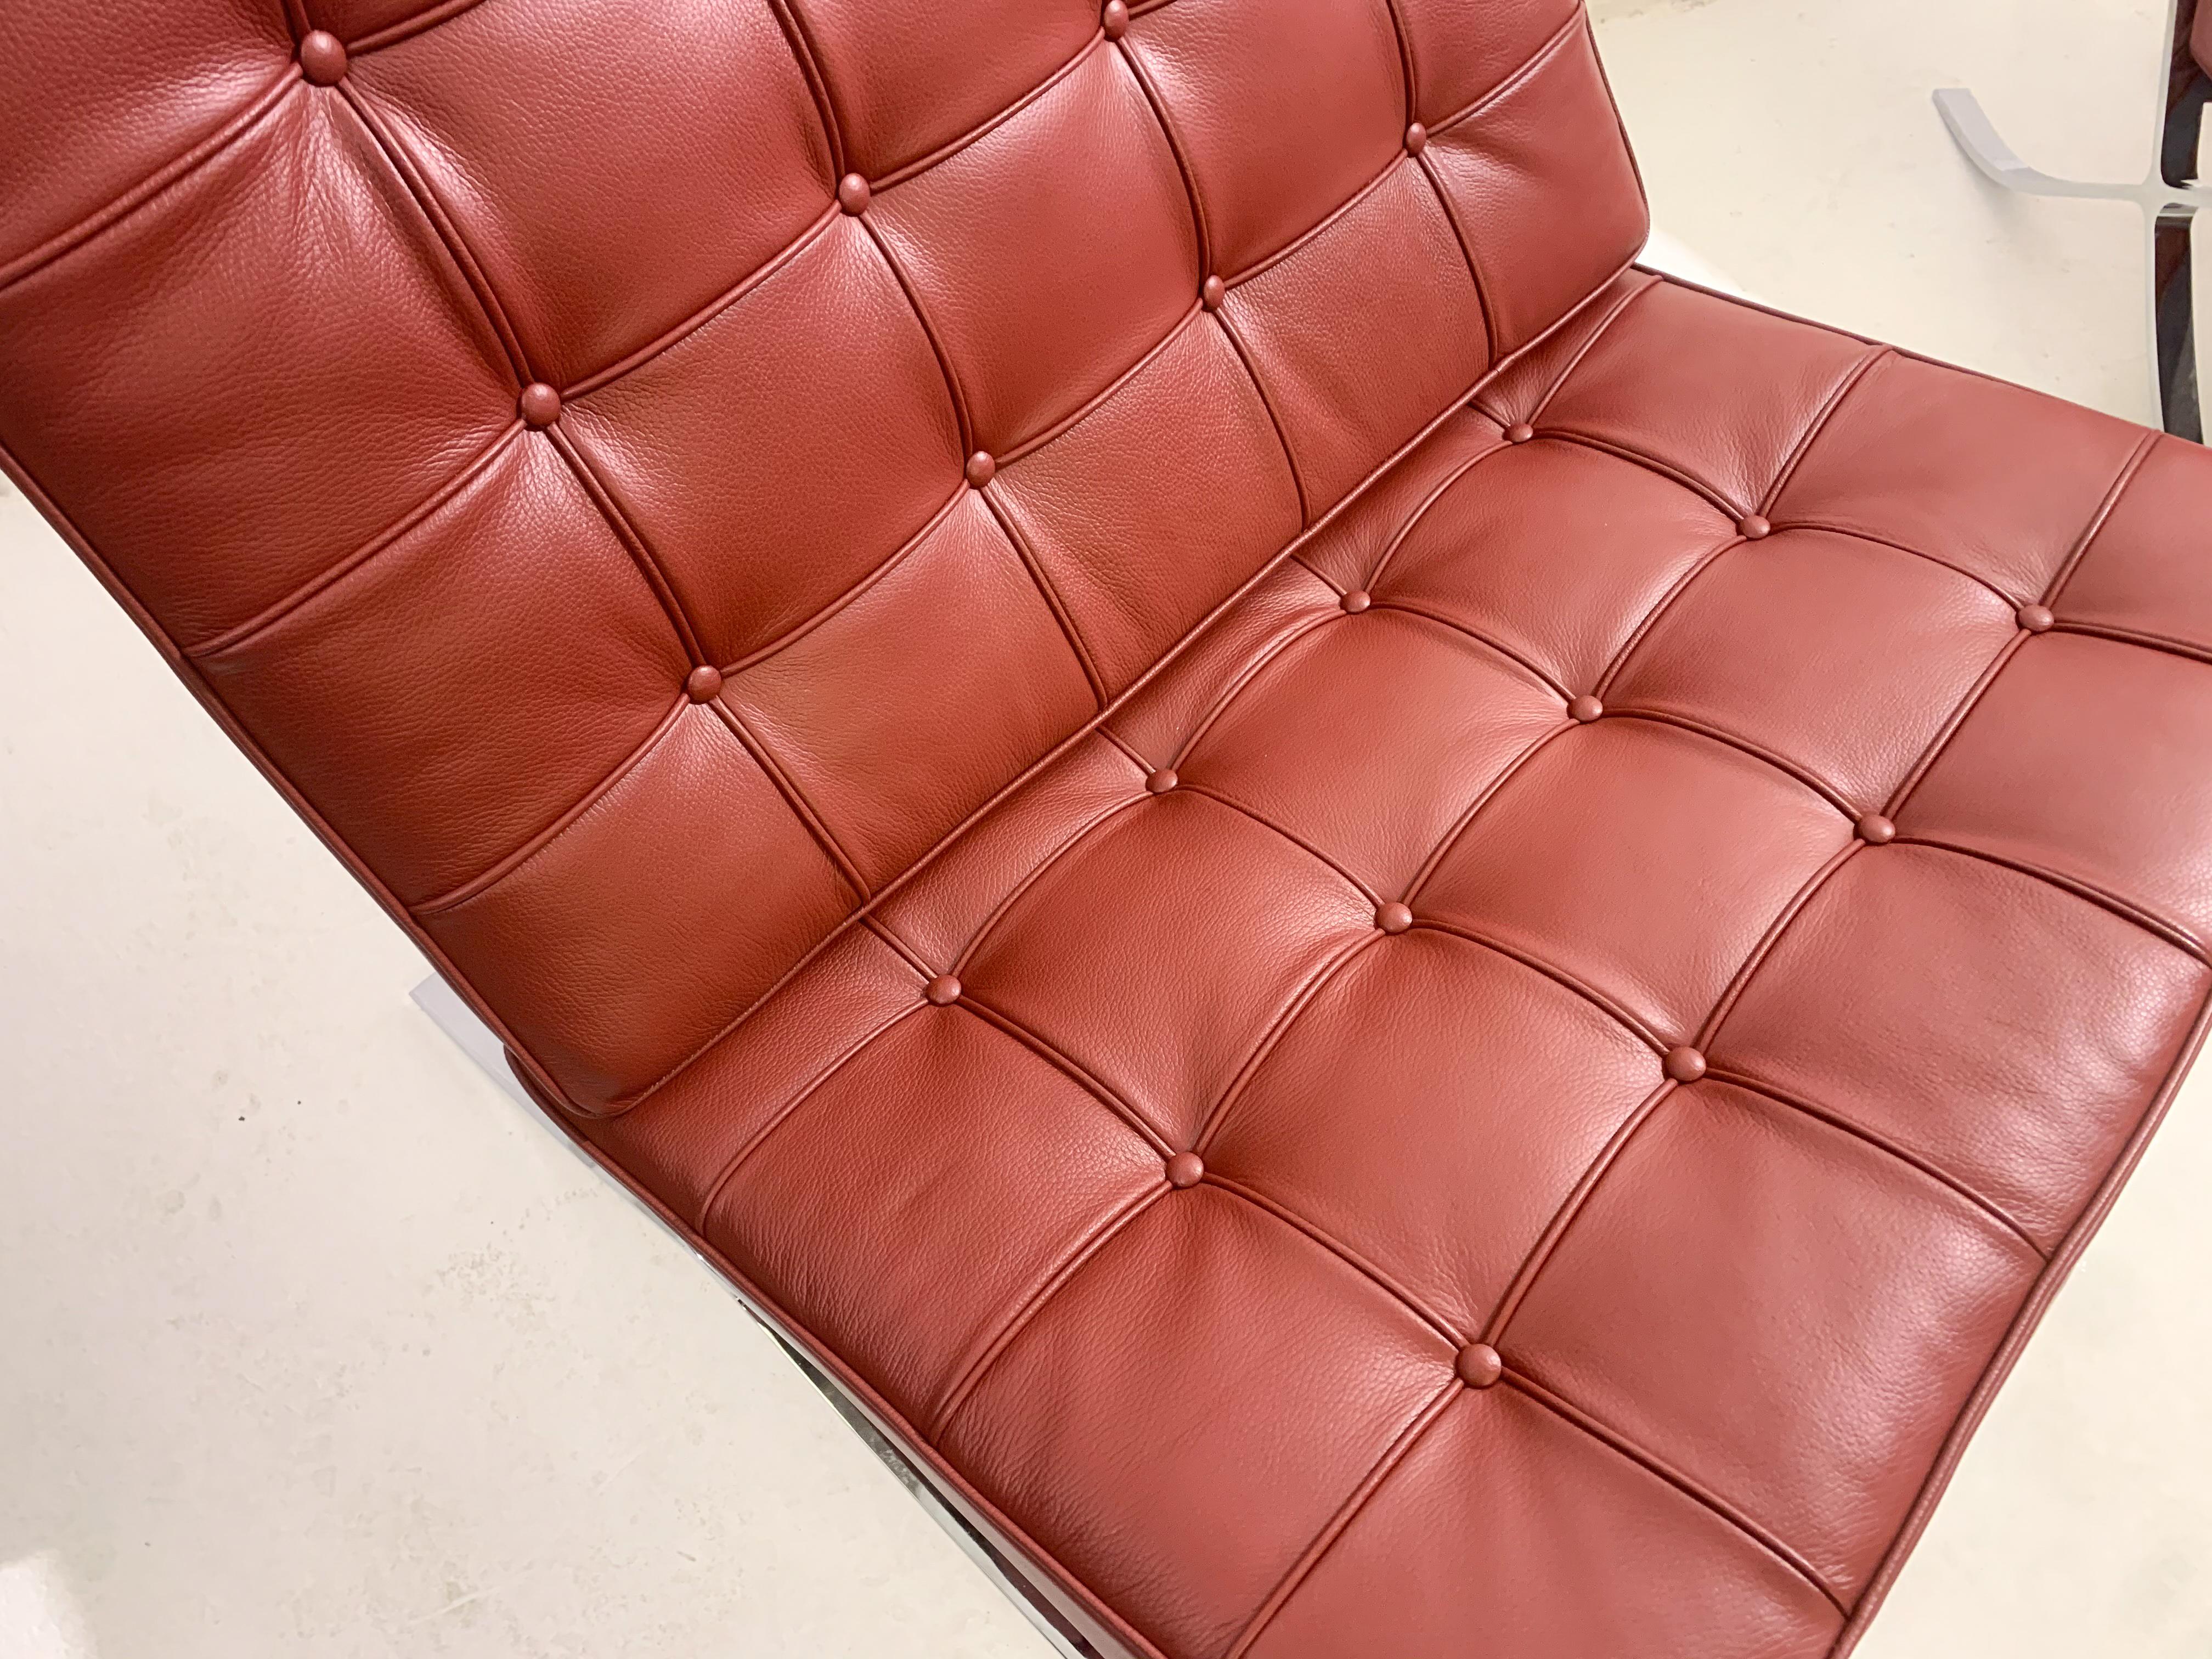 Pair of Burgundy Leather Barcelona Chairs by Mies Van Der Rohe for Knoll, 1990s For Sale 3